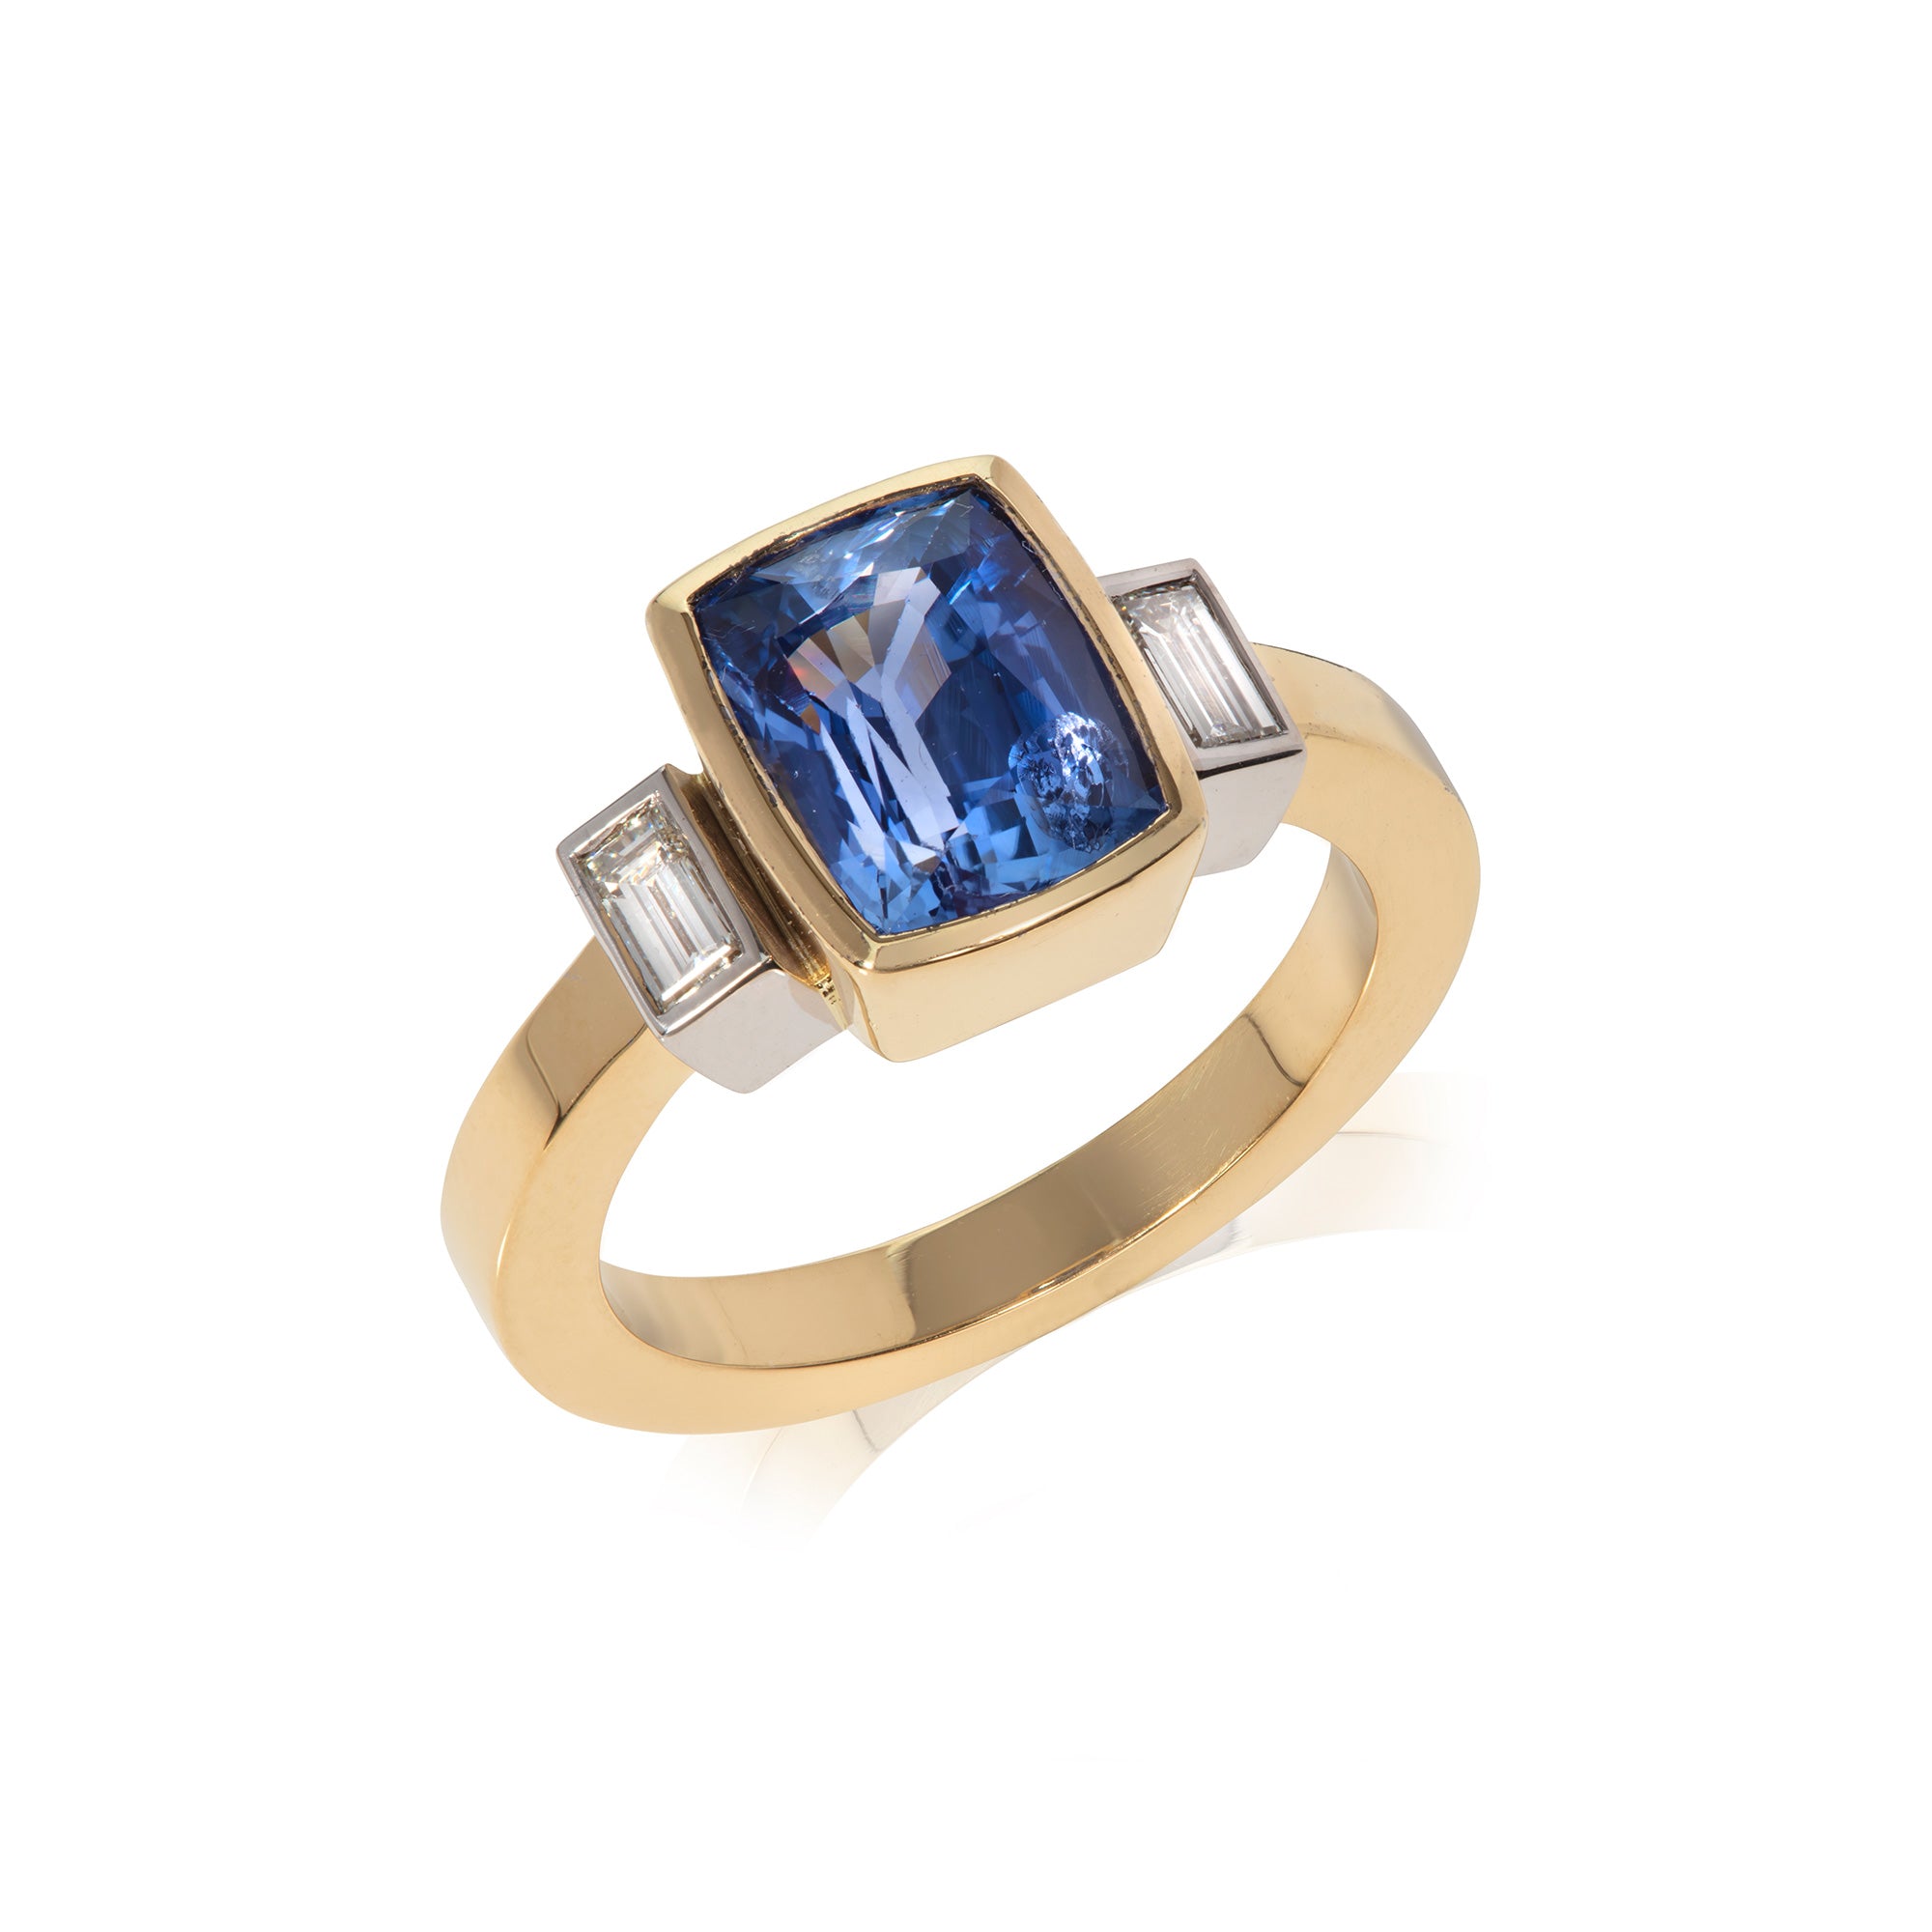 Sapphire and diamond baguette three stone ring photographed on white background